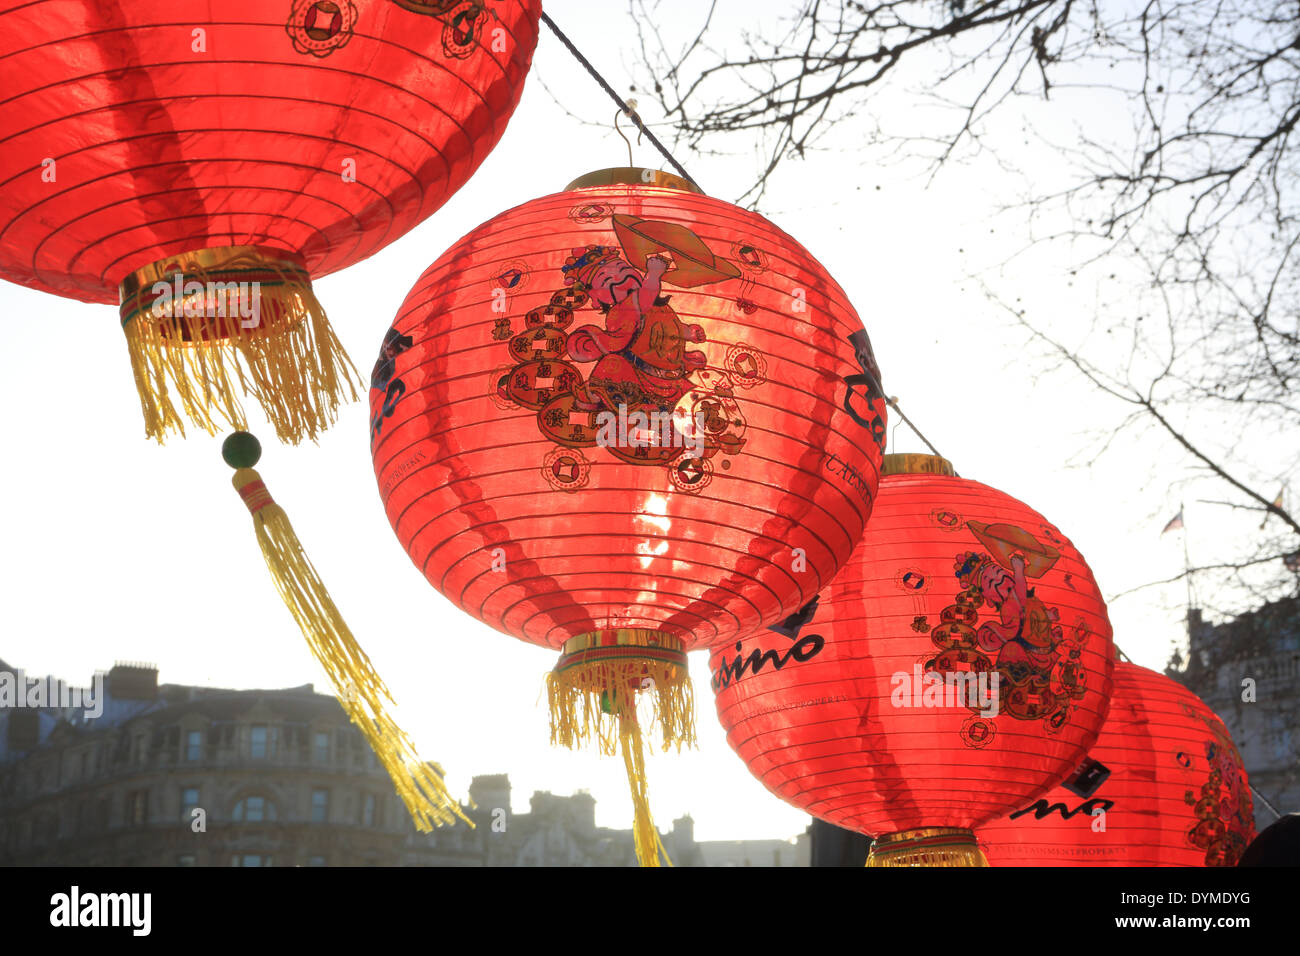 Lanterns for Chinese New Year celebrations in 2014, Year of the Horse, in Trafalgar Square, London, England, UK Stock Photo